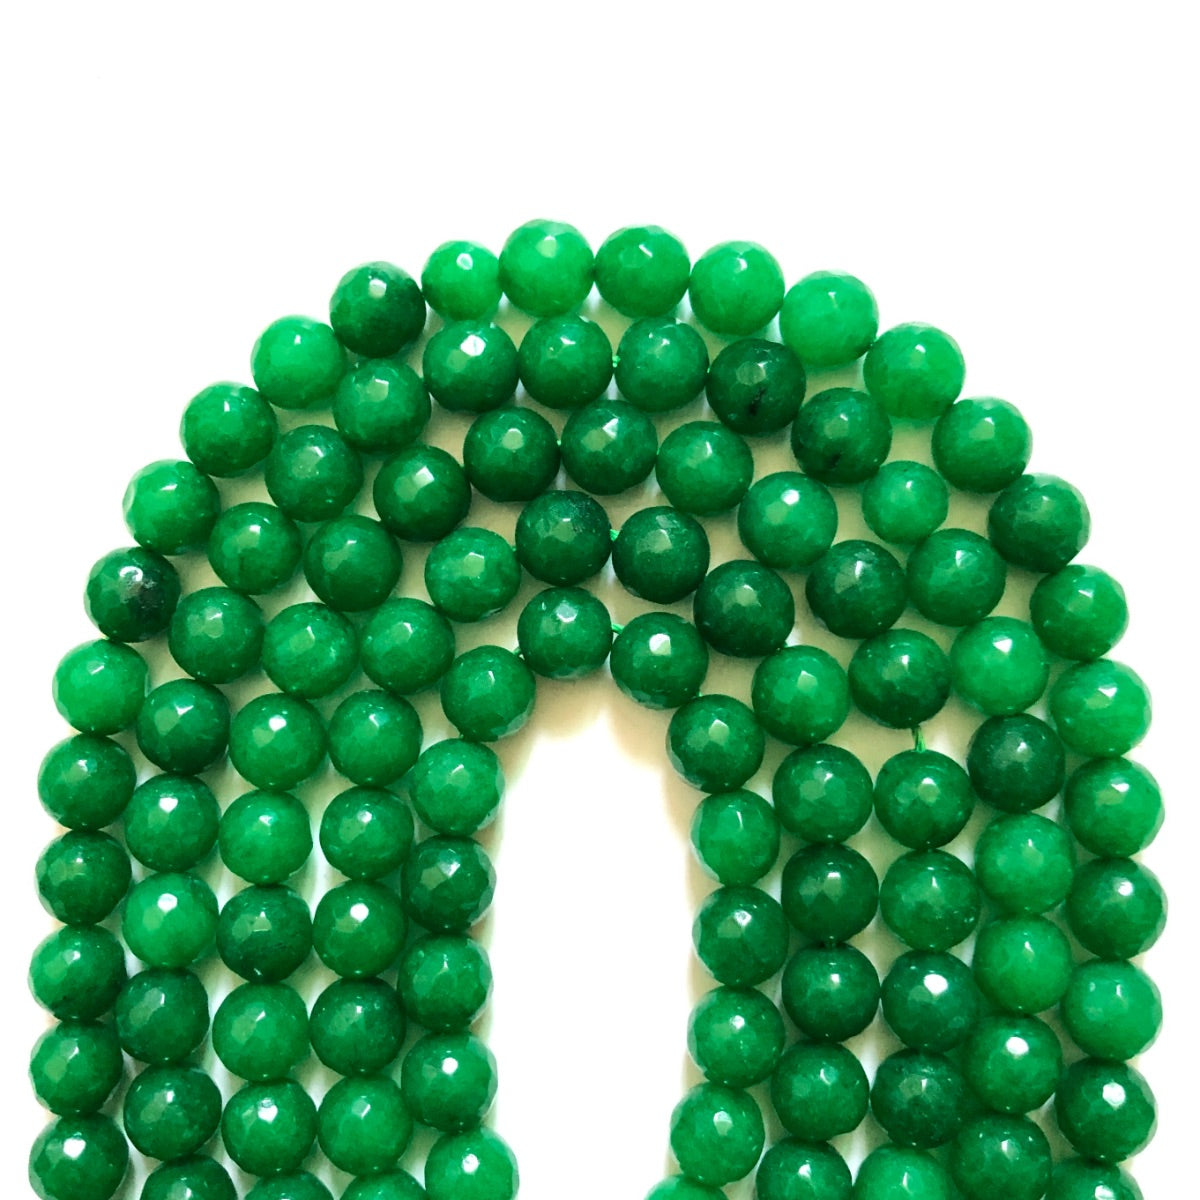 2 Strands/lot 10mm Green Faceted Jade Stone Beads Stone Beads Faceted Jade Beads New Beads Arrivals Charms Beads Beyond